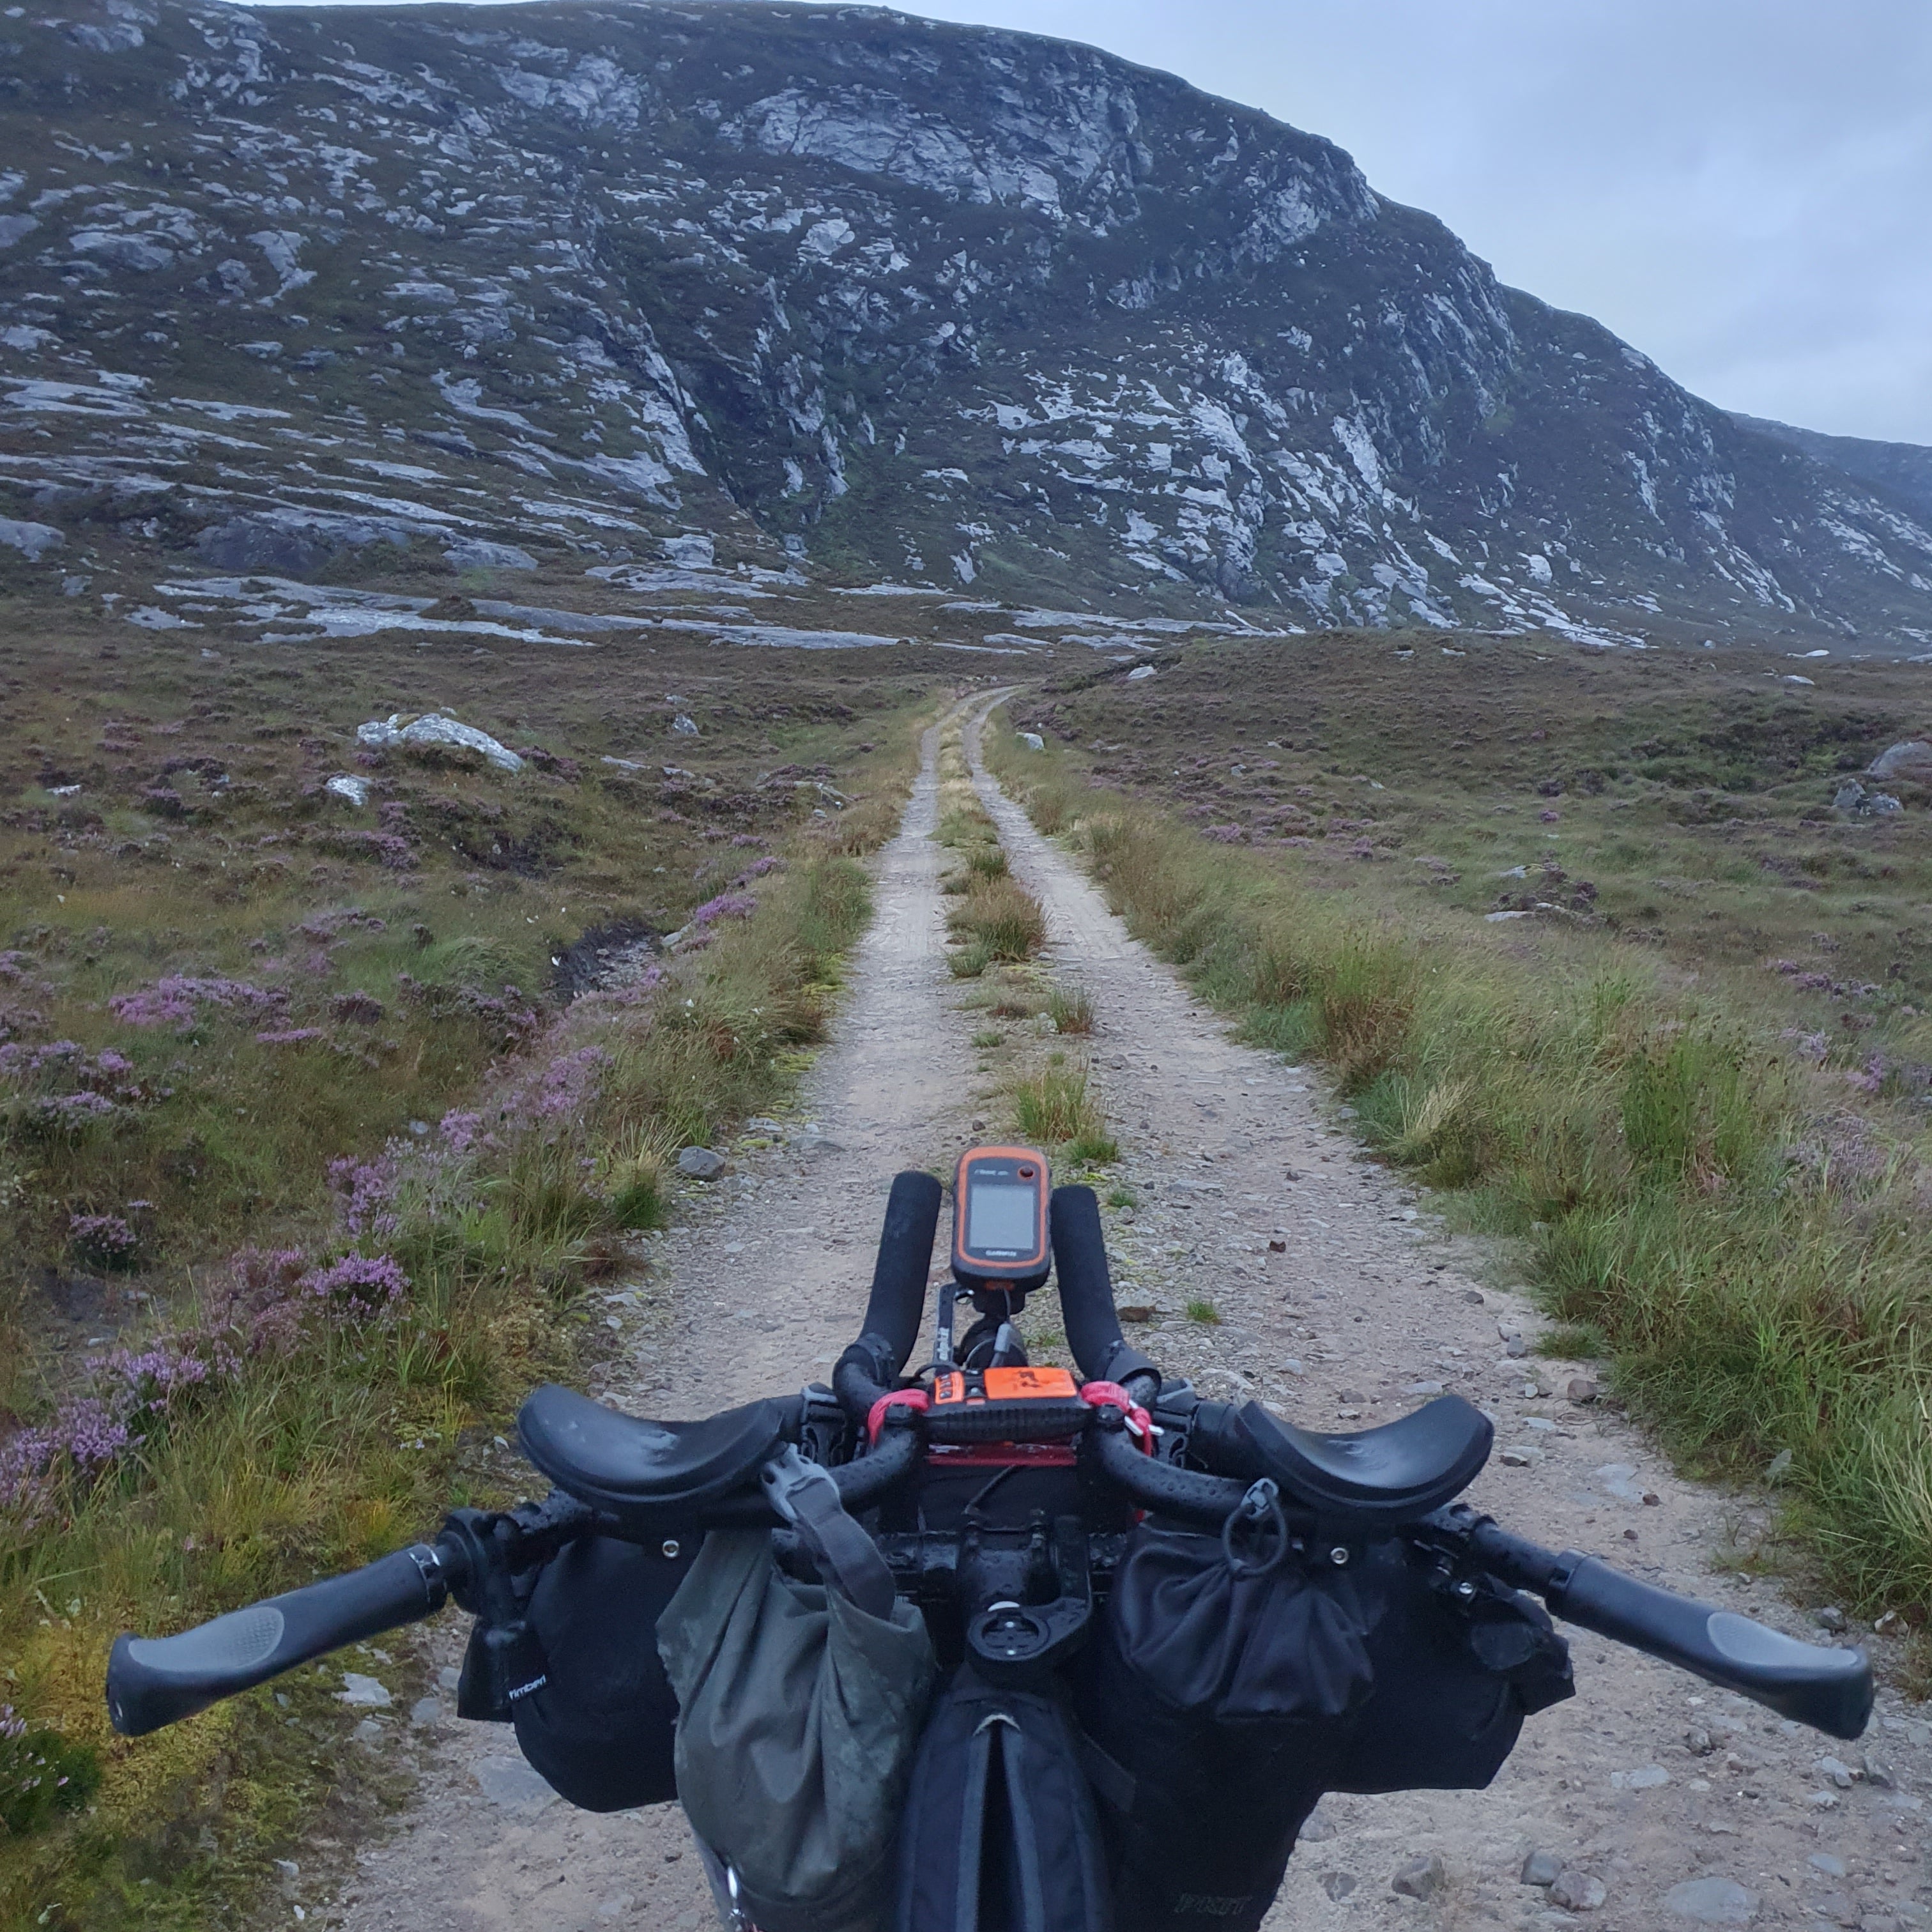 Classic handlebar shoot with dramatic Scottish scenery in the background